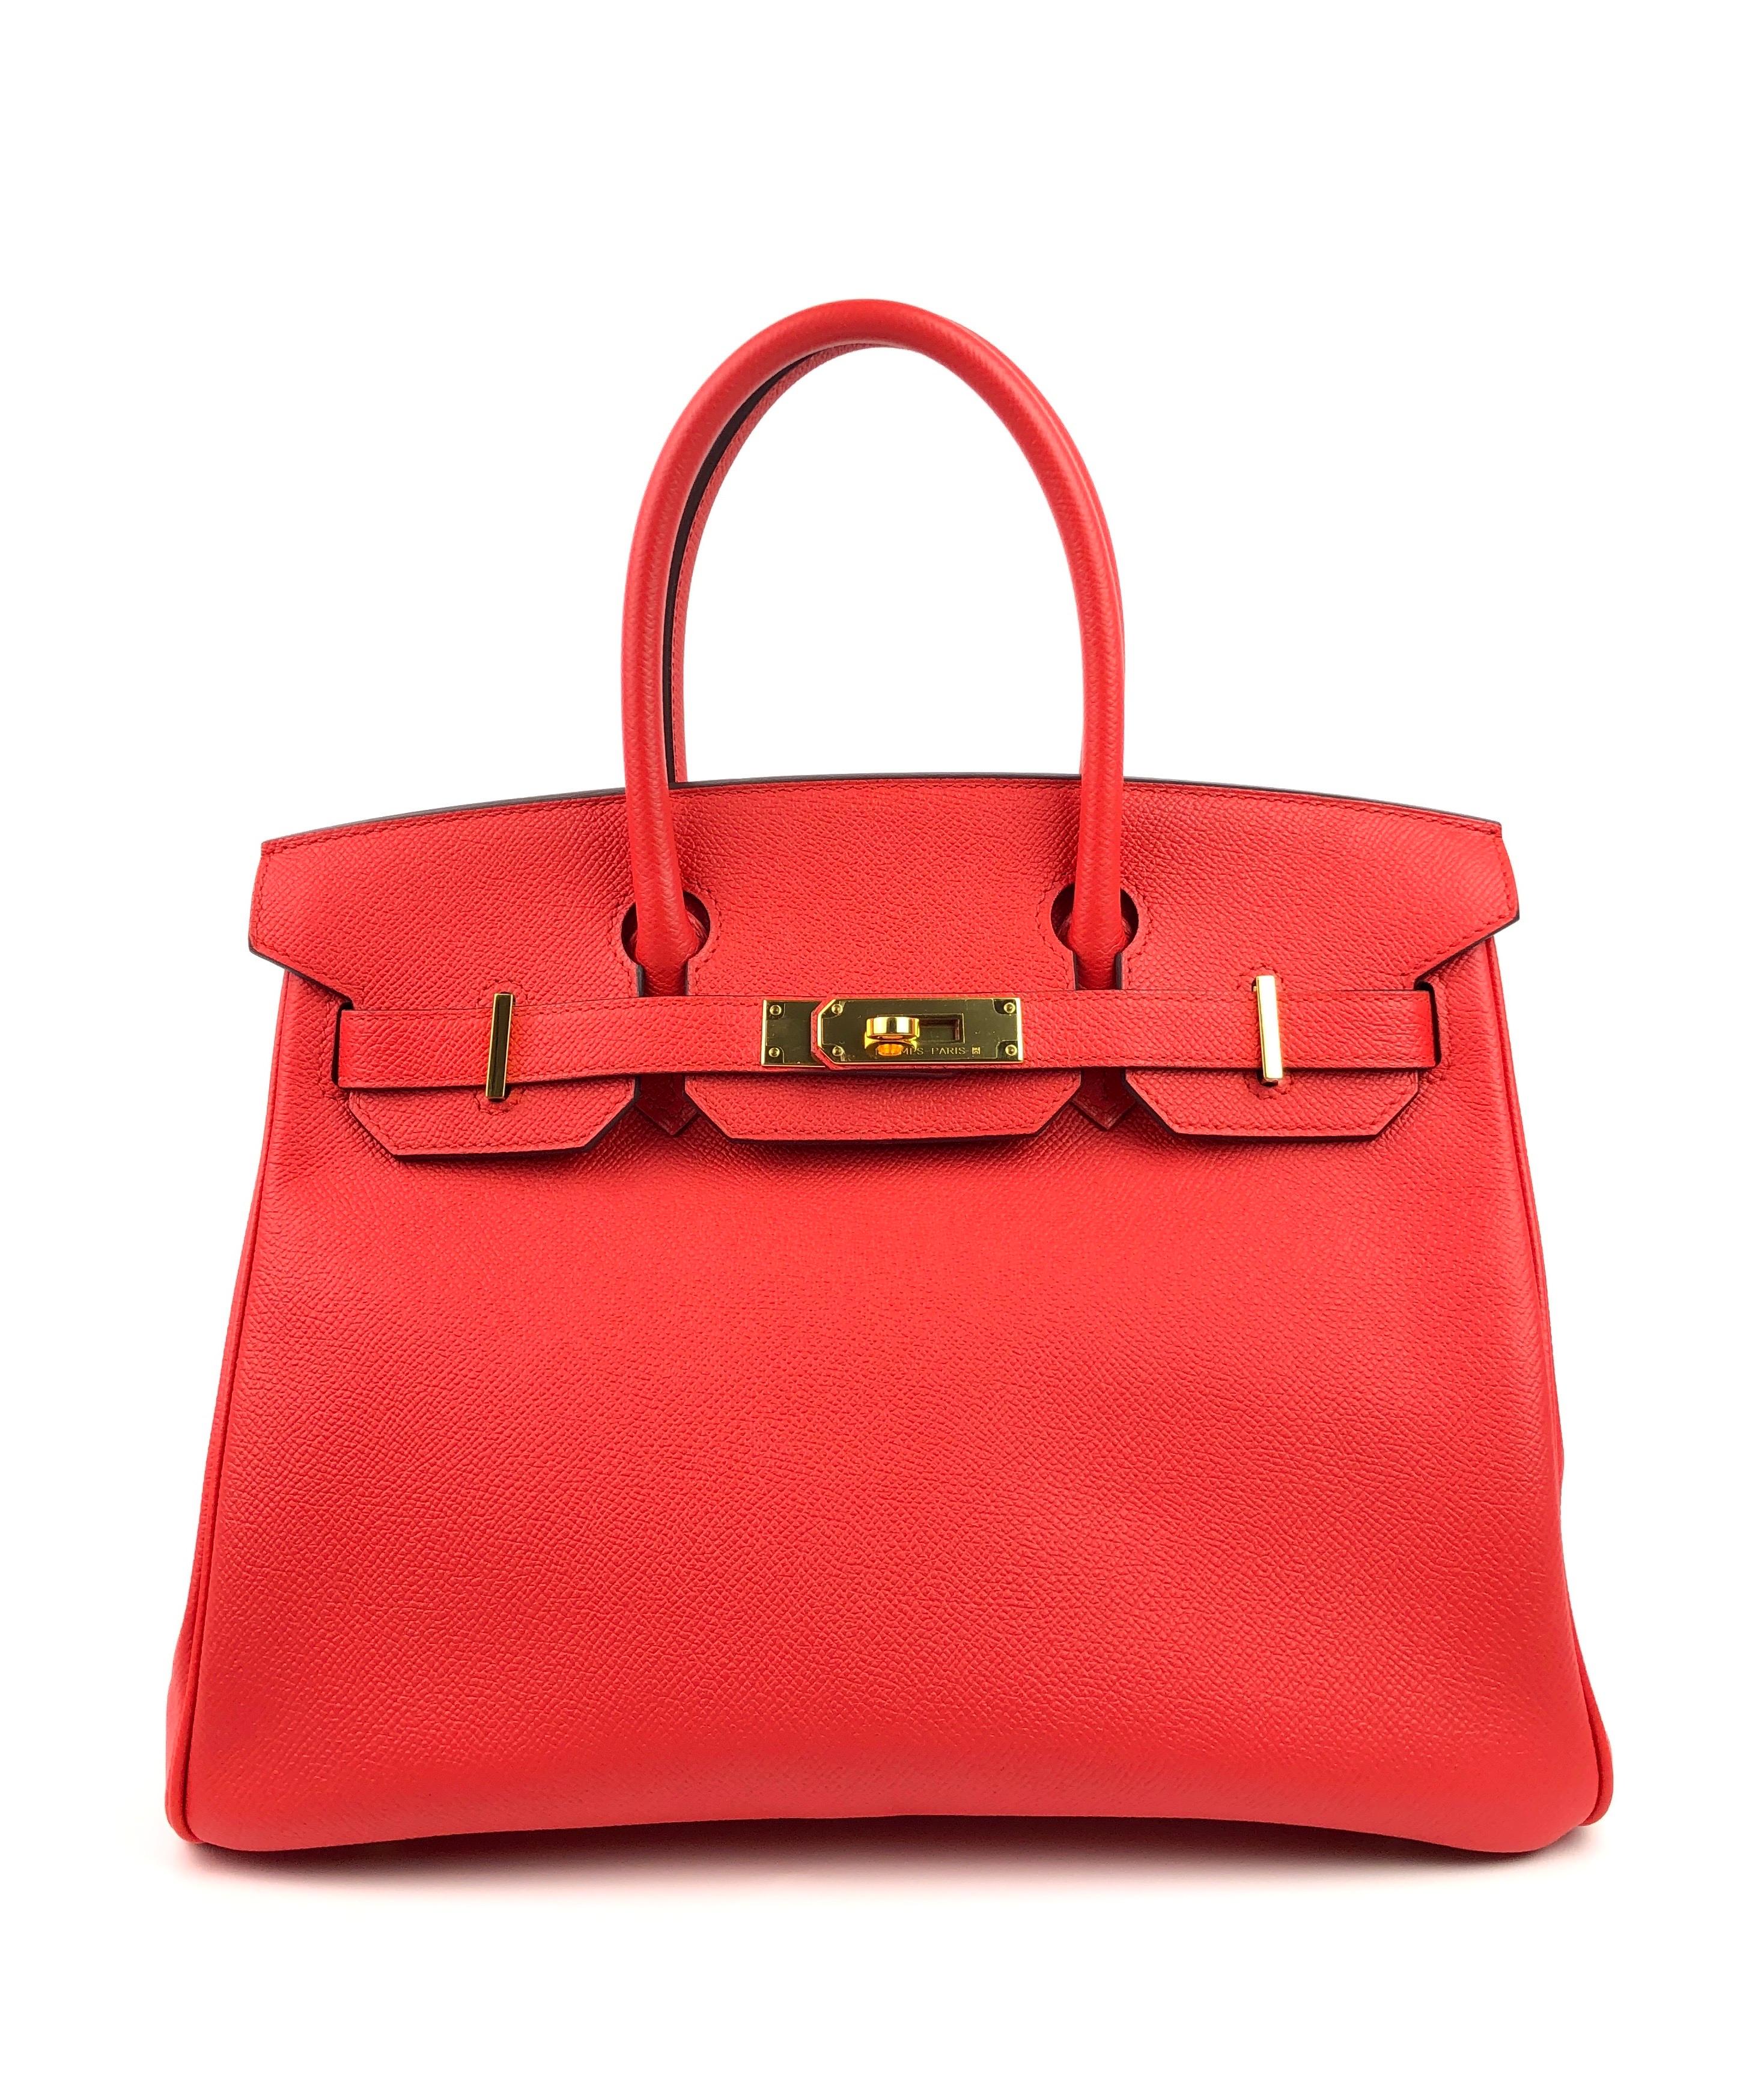 RARE Hermes Birkin 30 Rouge Tomate Red Epsom Gold Hardware. A Stamp 2017. Excellent Prisitne Condition Plastic on Hardware, Excellent corners and Structure.

Shop with Confidence from Lux Addicts. Authenticity Guaranteed! 